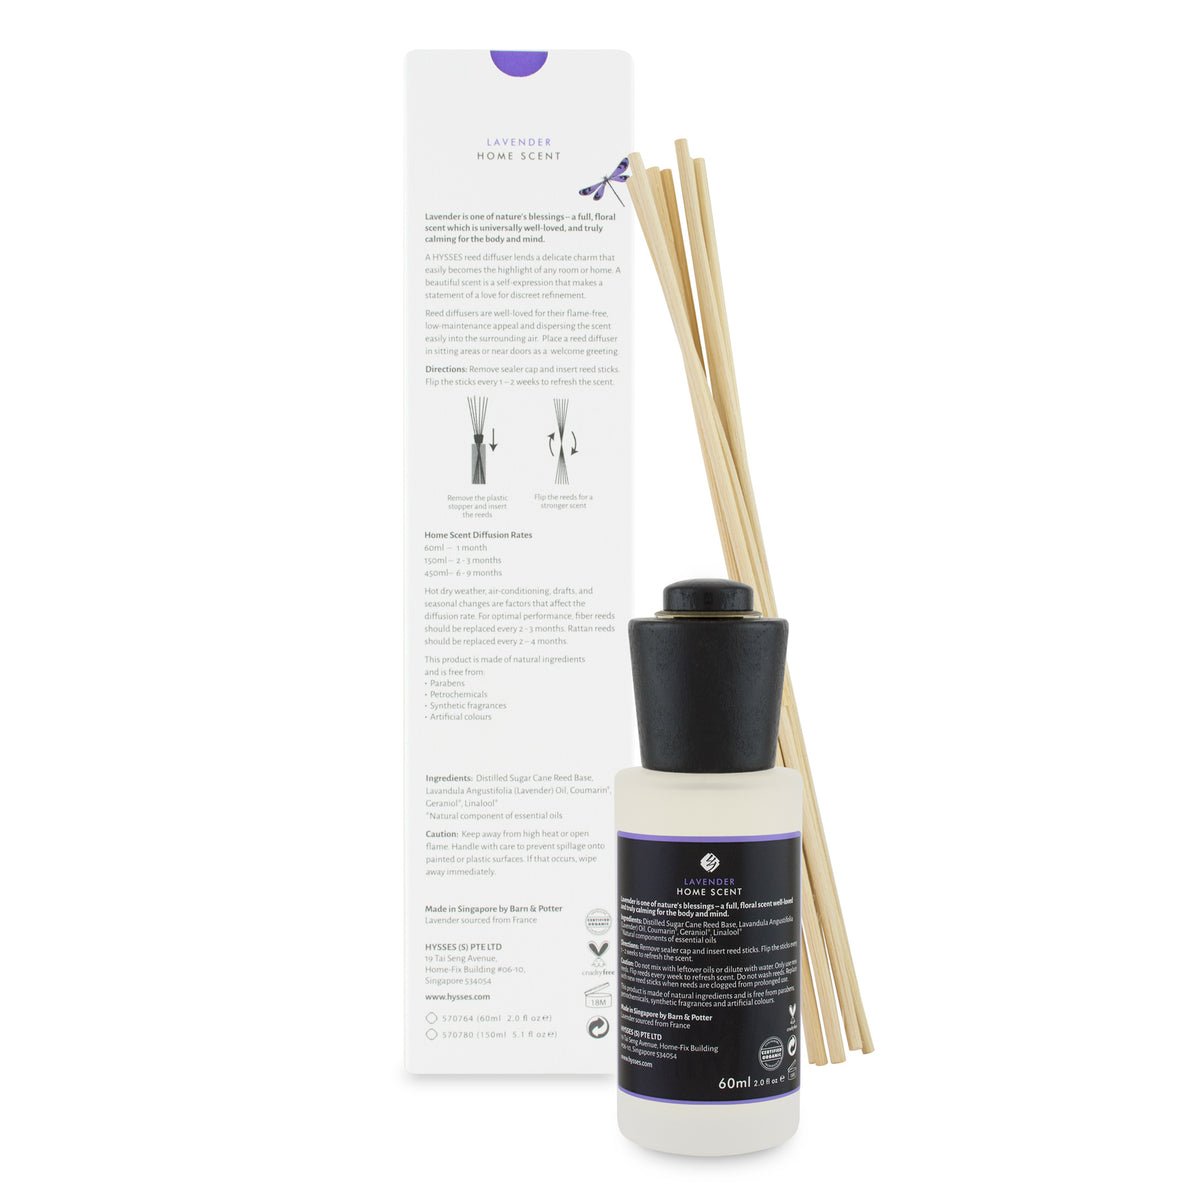 Home Scent Reed Diffuser Lavender - HYSSES